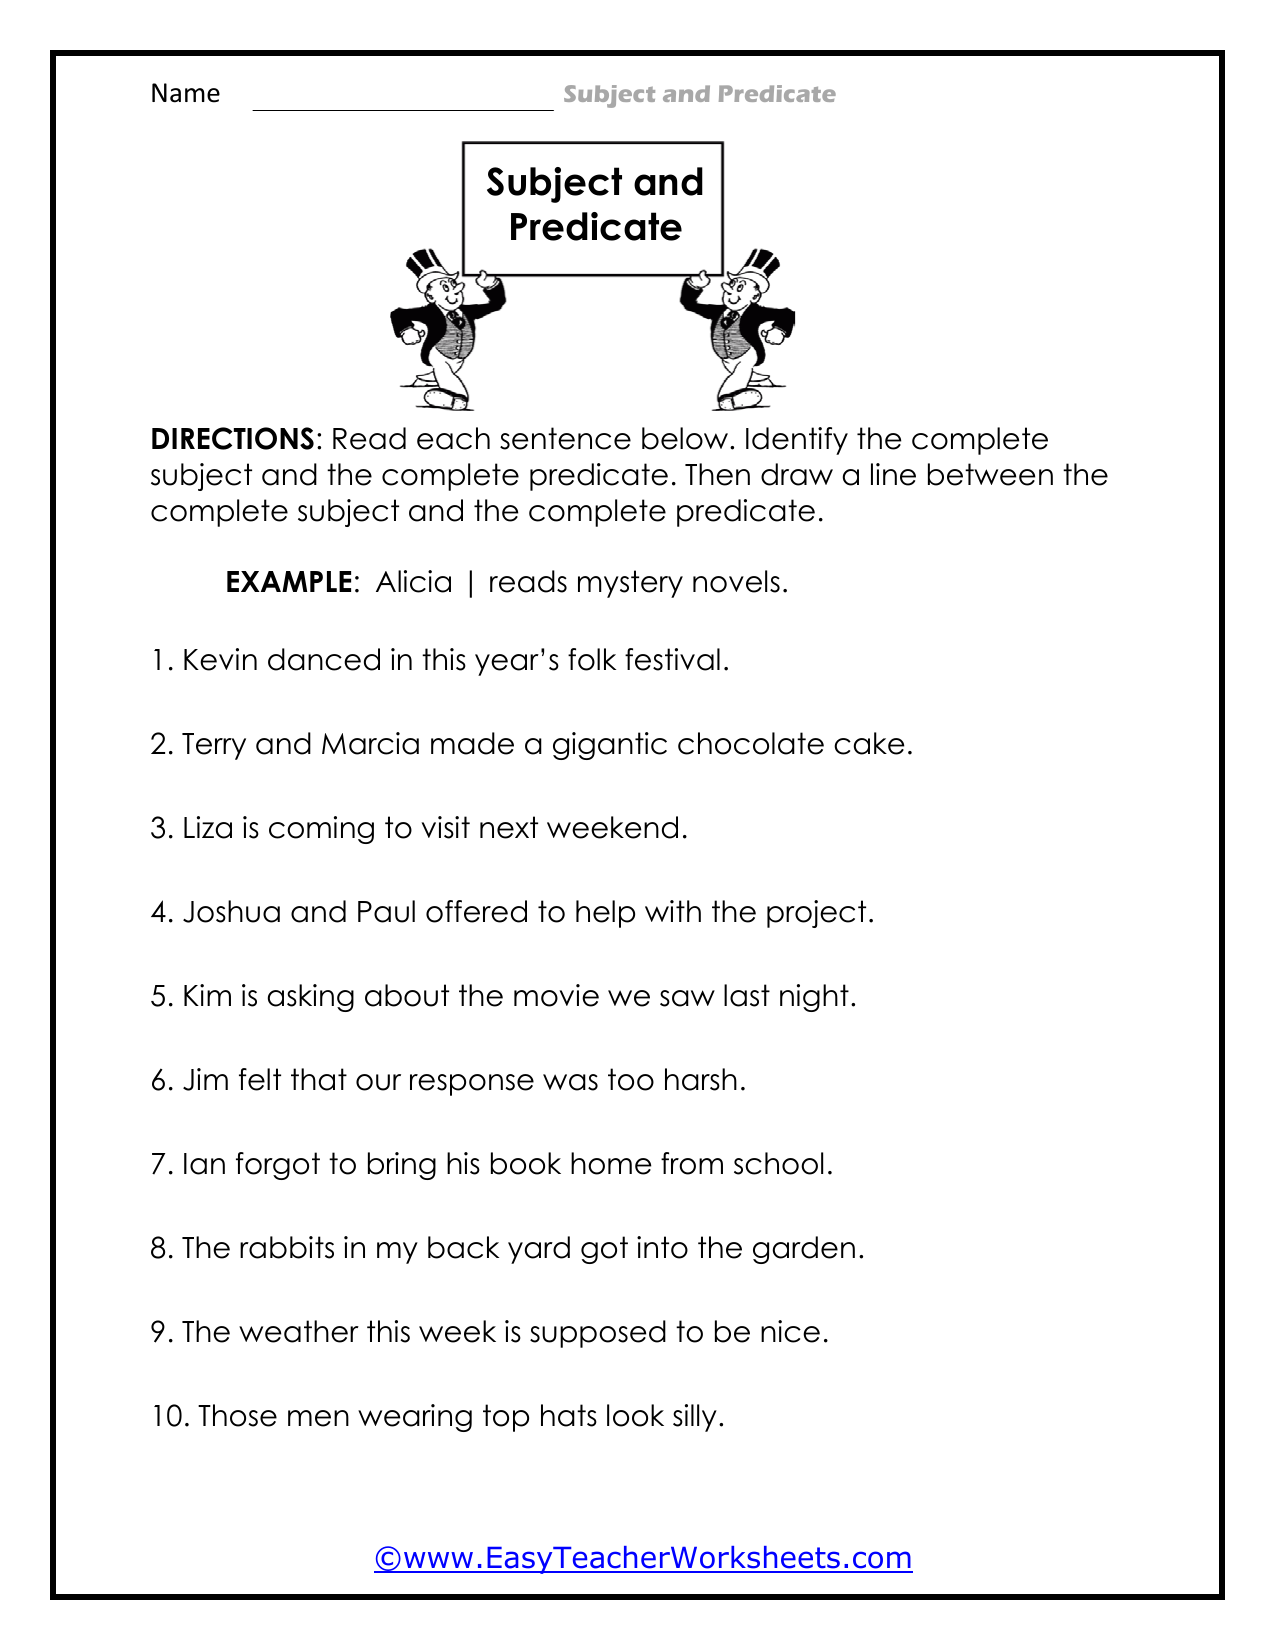 Simple And Complete Subjects And Predicates Worksheet